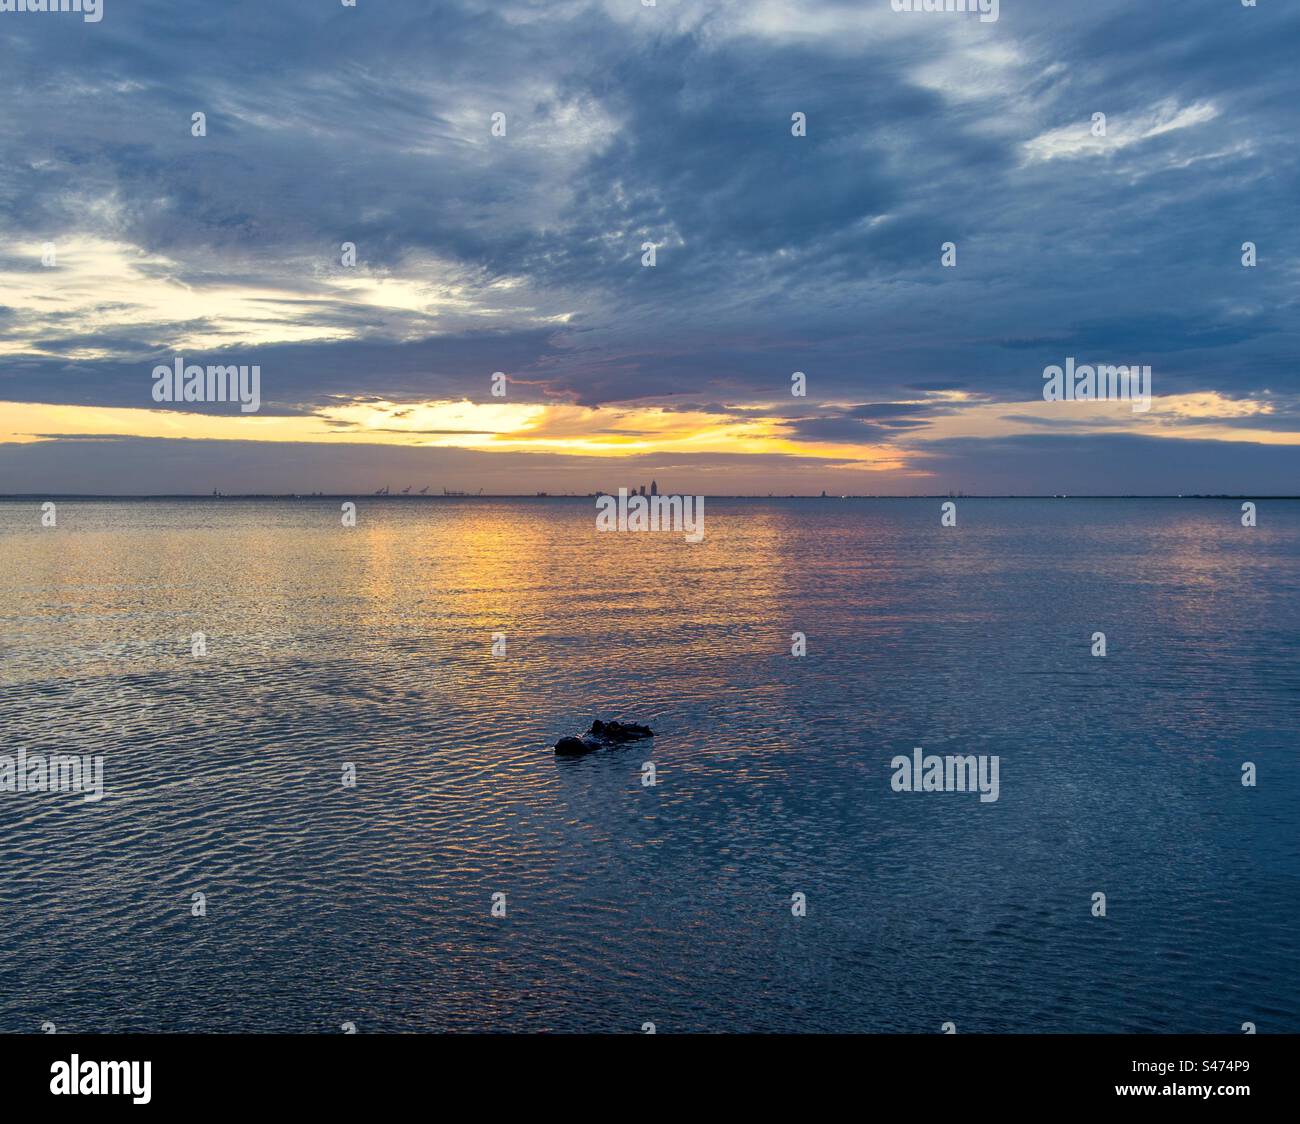 American Alligator surfaces at sunset Stock Photo